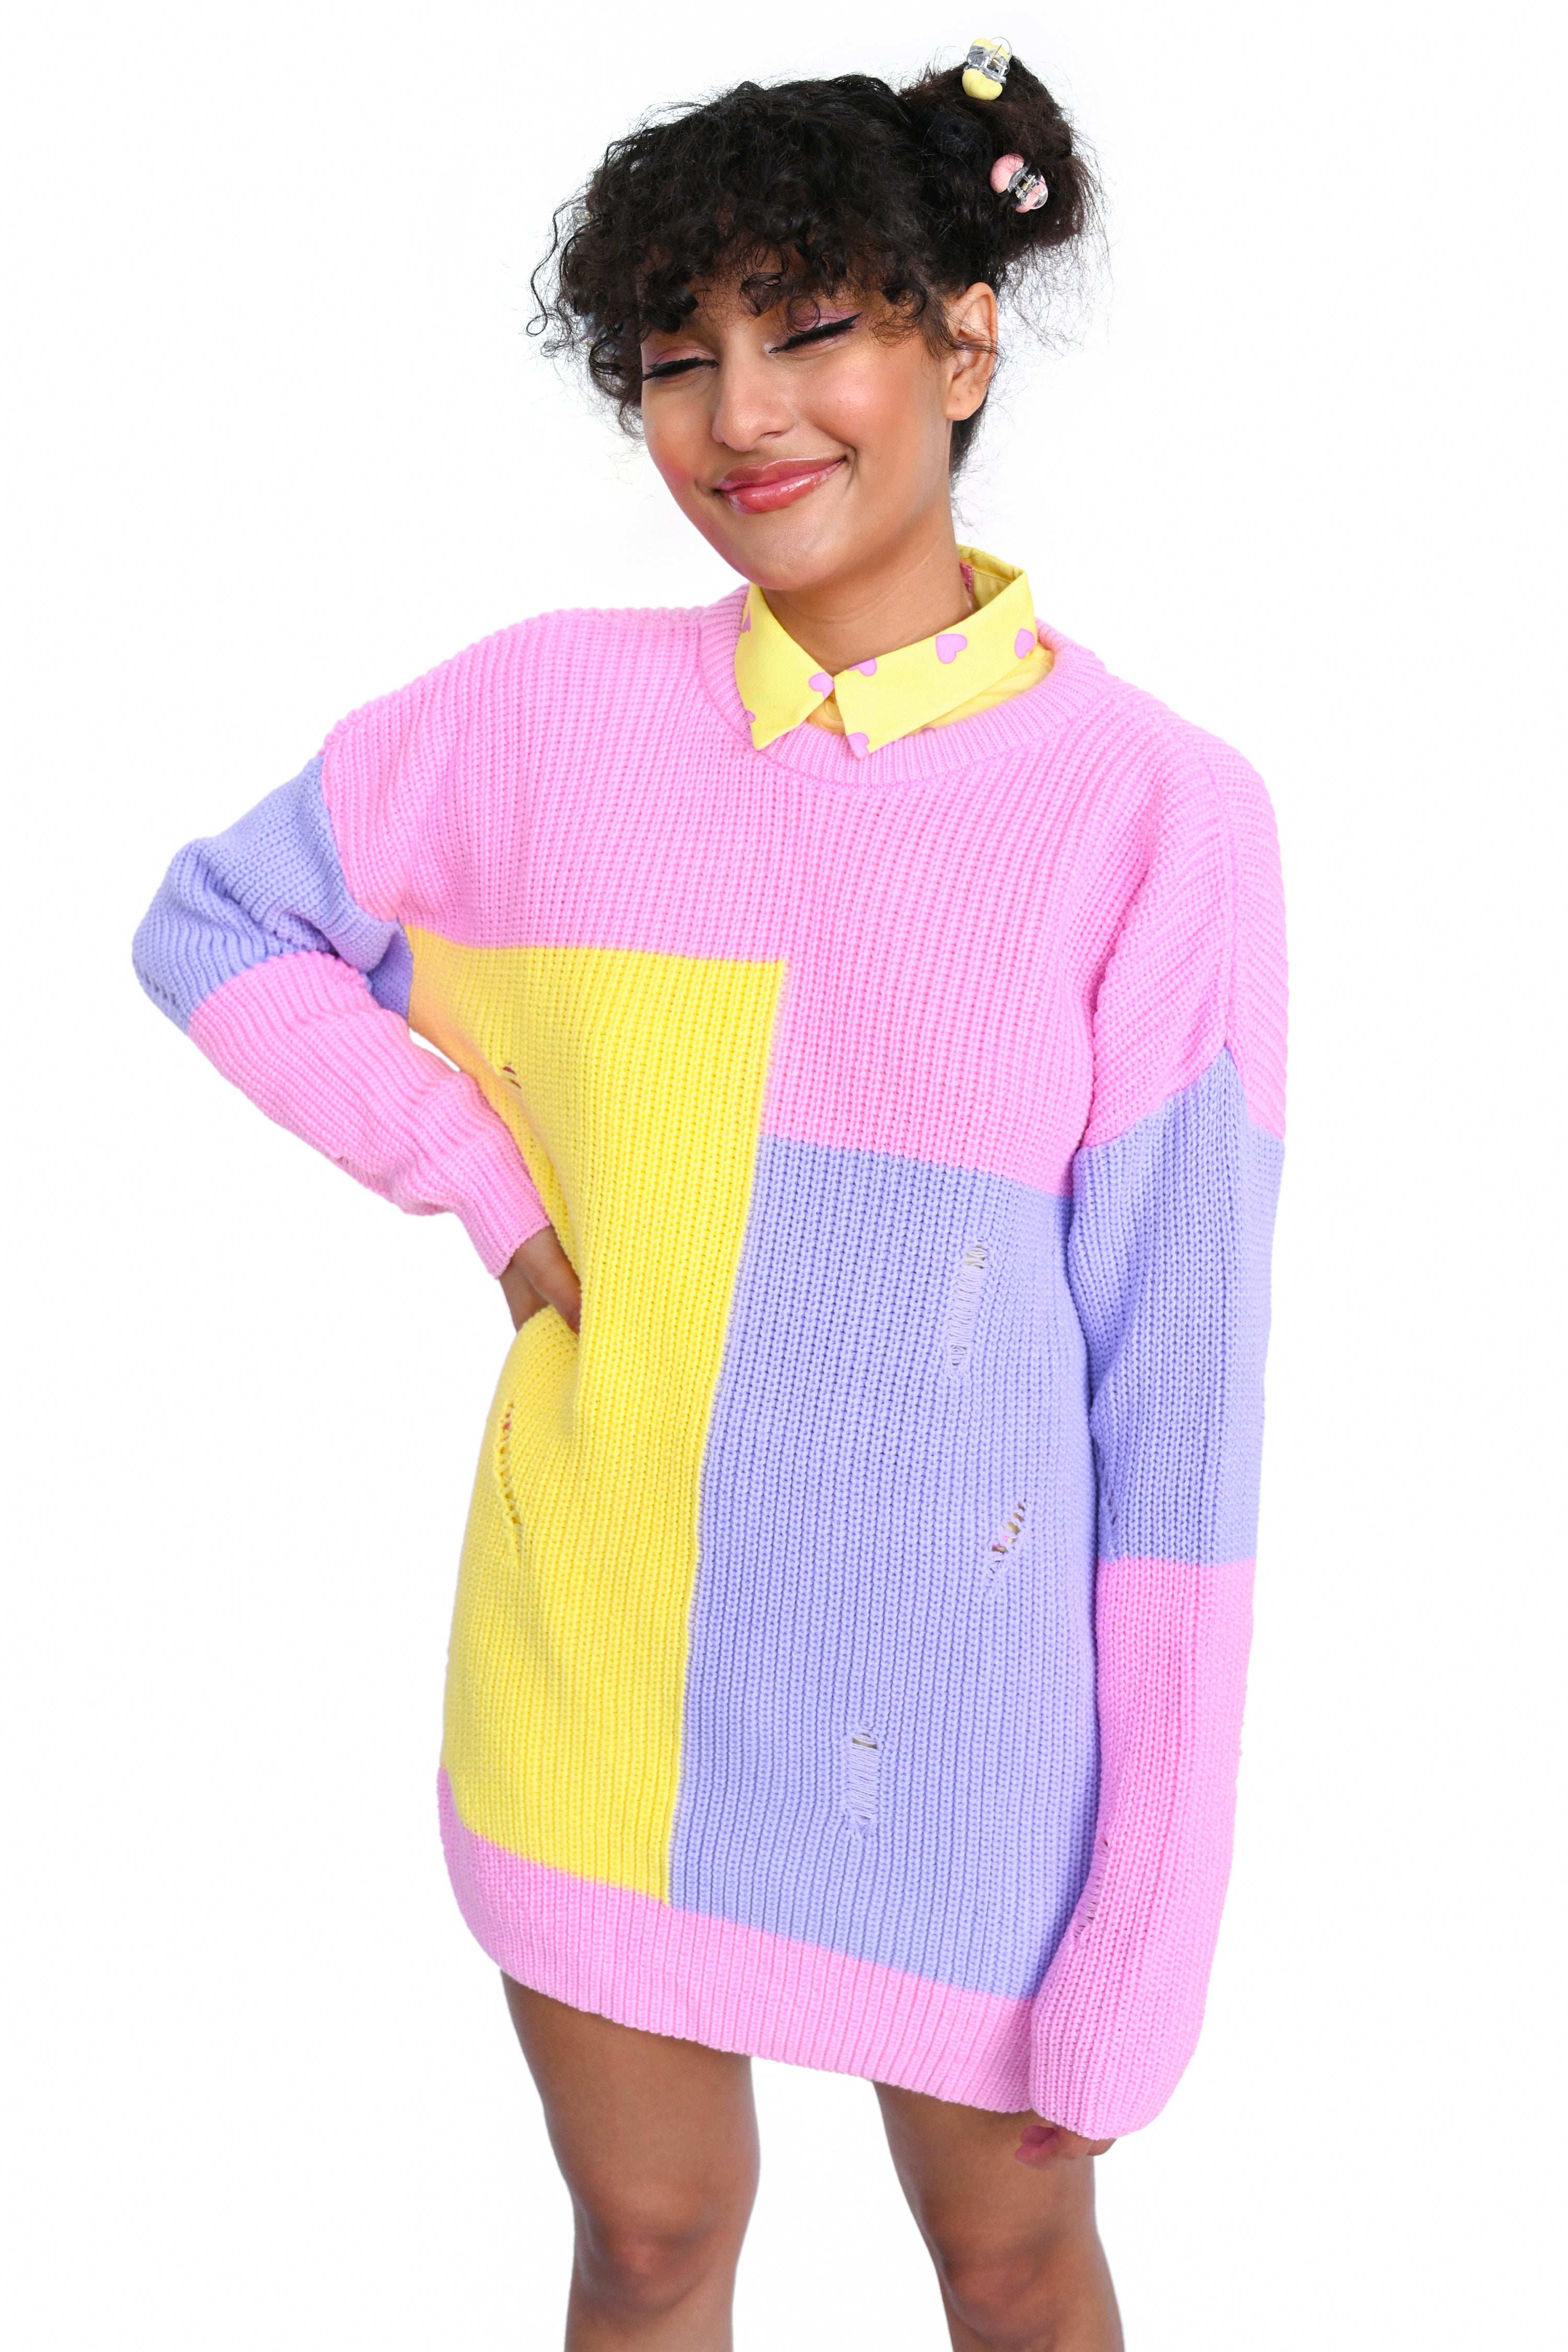 Vibrant candy colored colorblock sweater in lavender, yellow, and pink